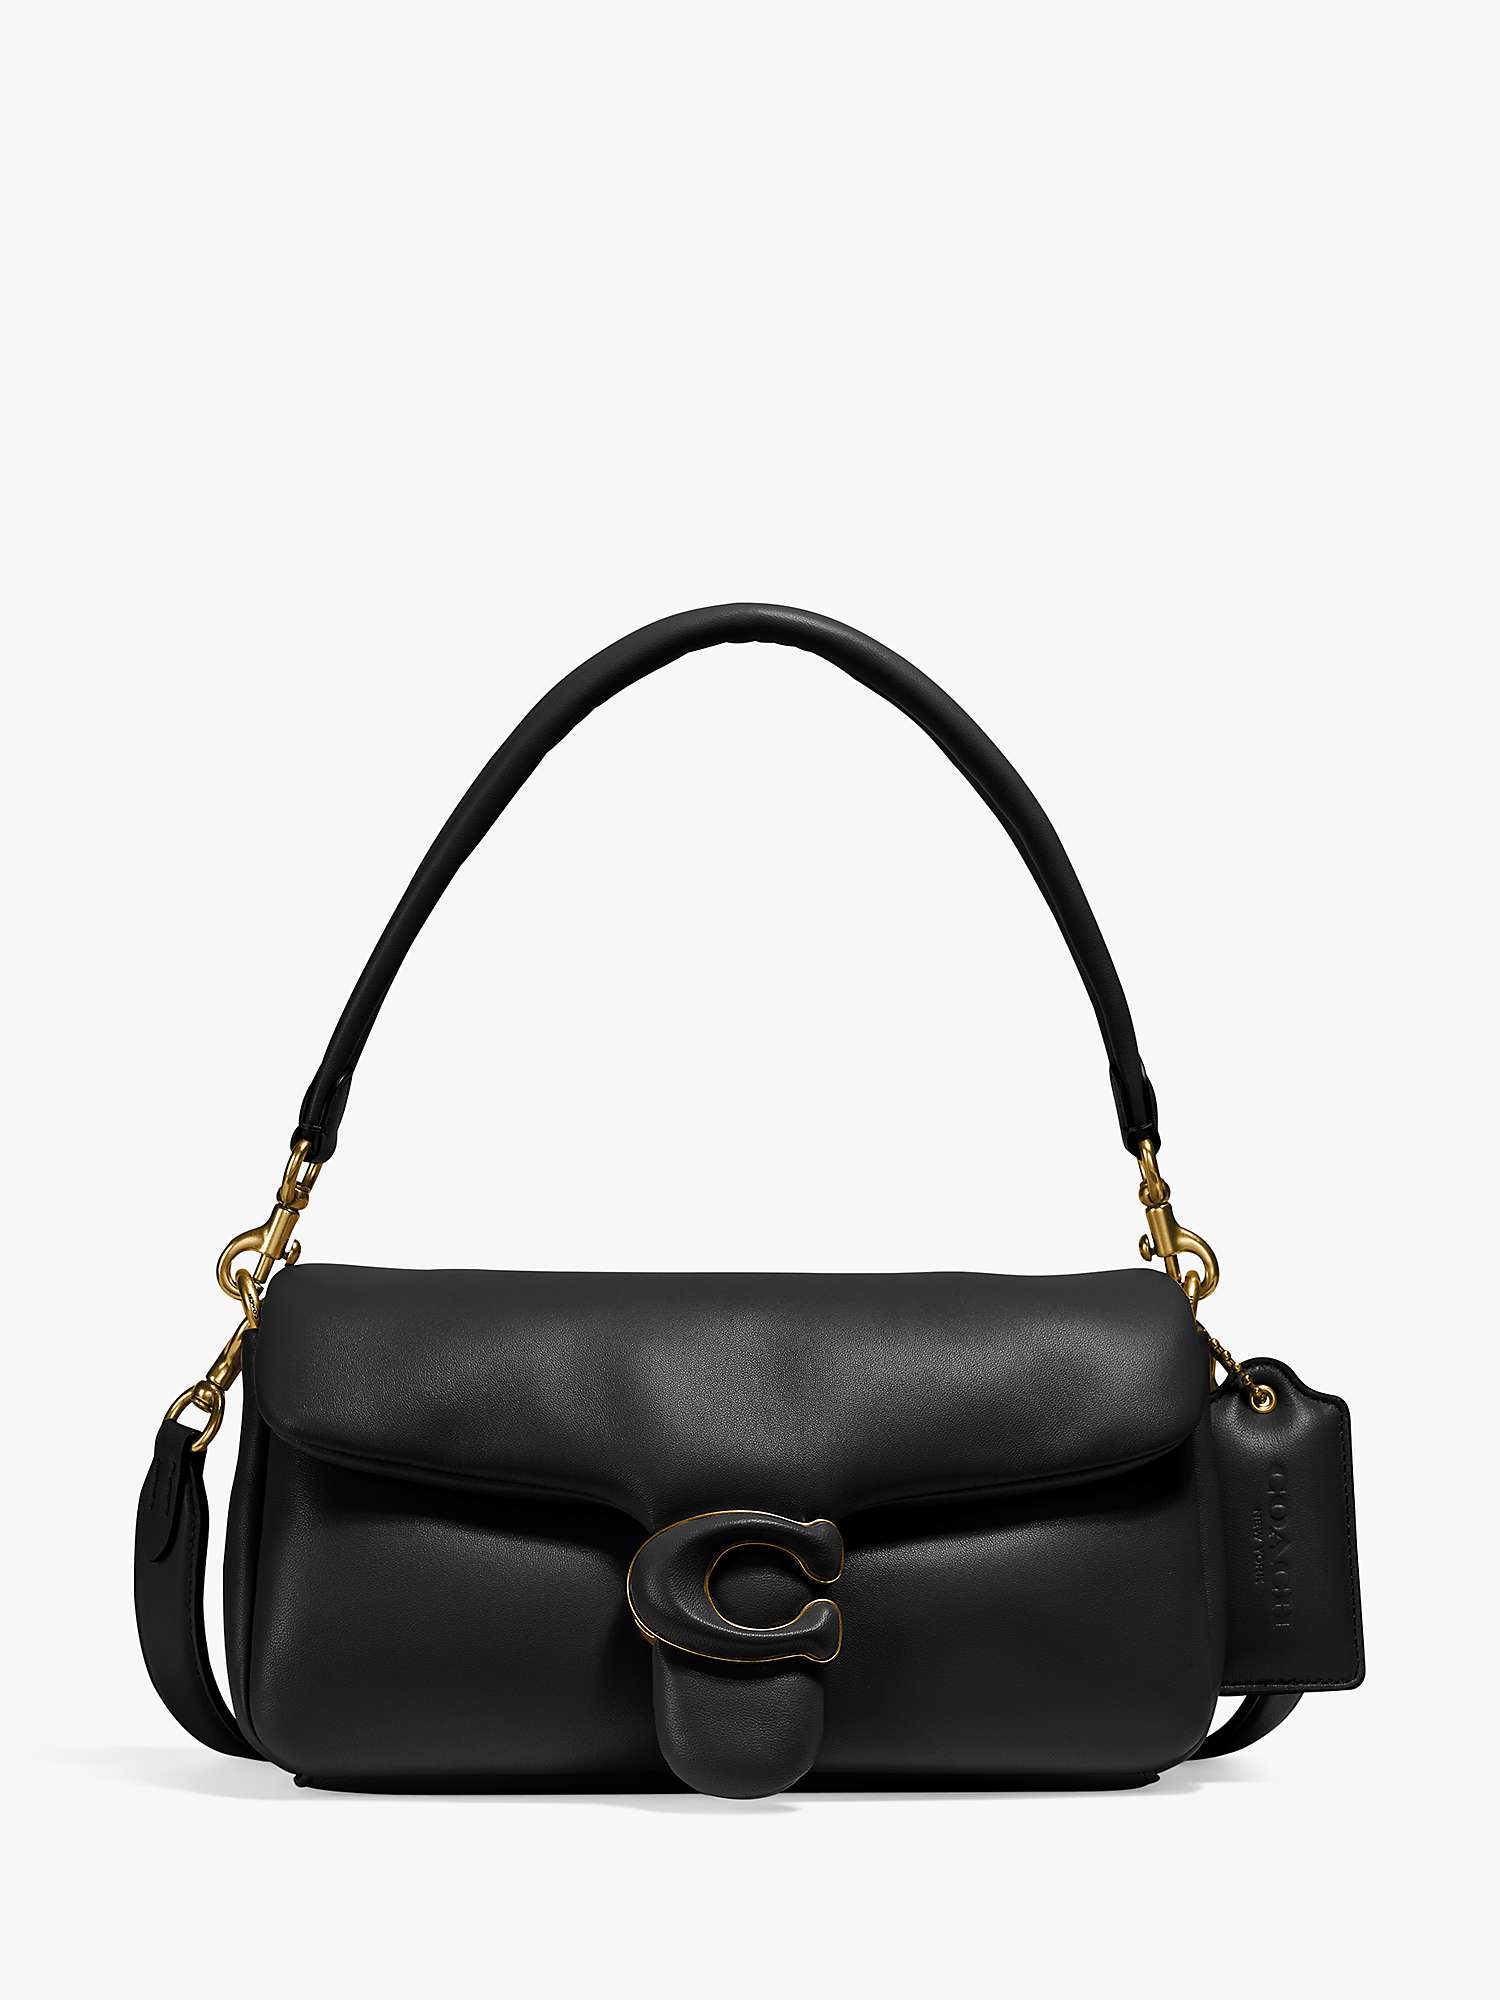 Buy Coach Pillow Tabby 26 Leather Shoulder Bag Online at johnlewis.com